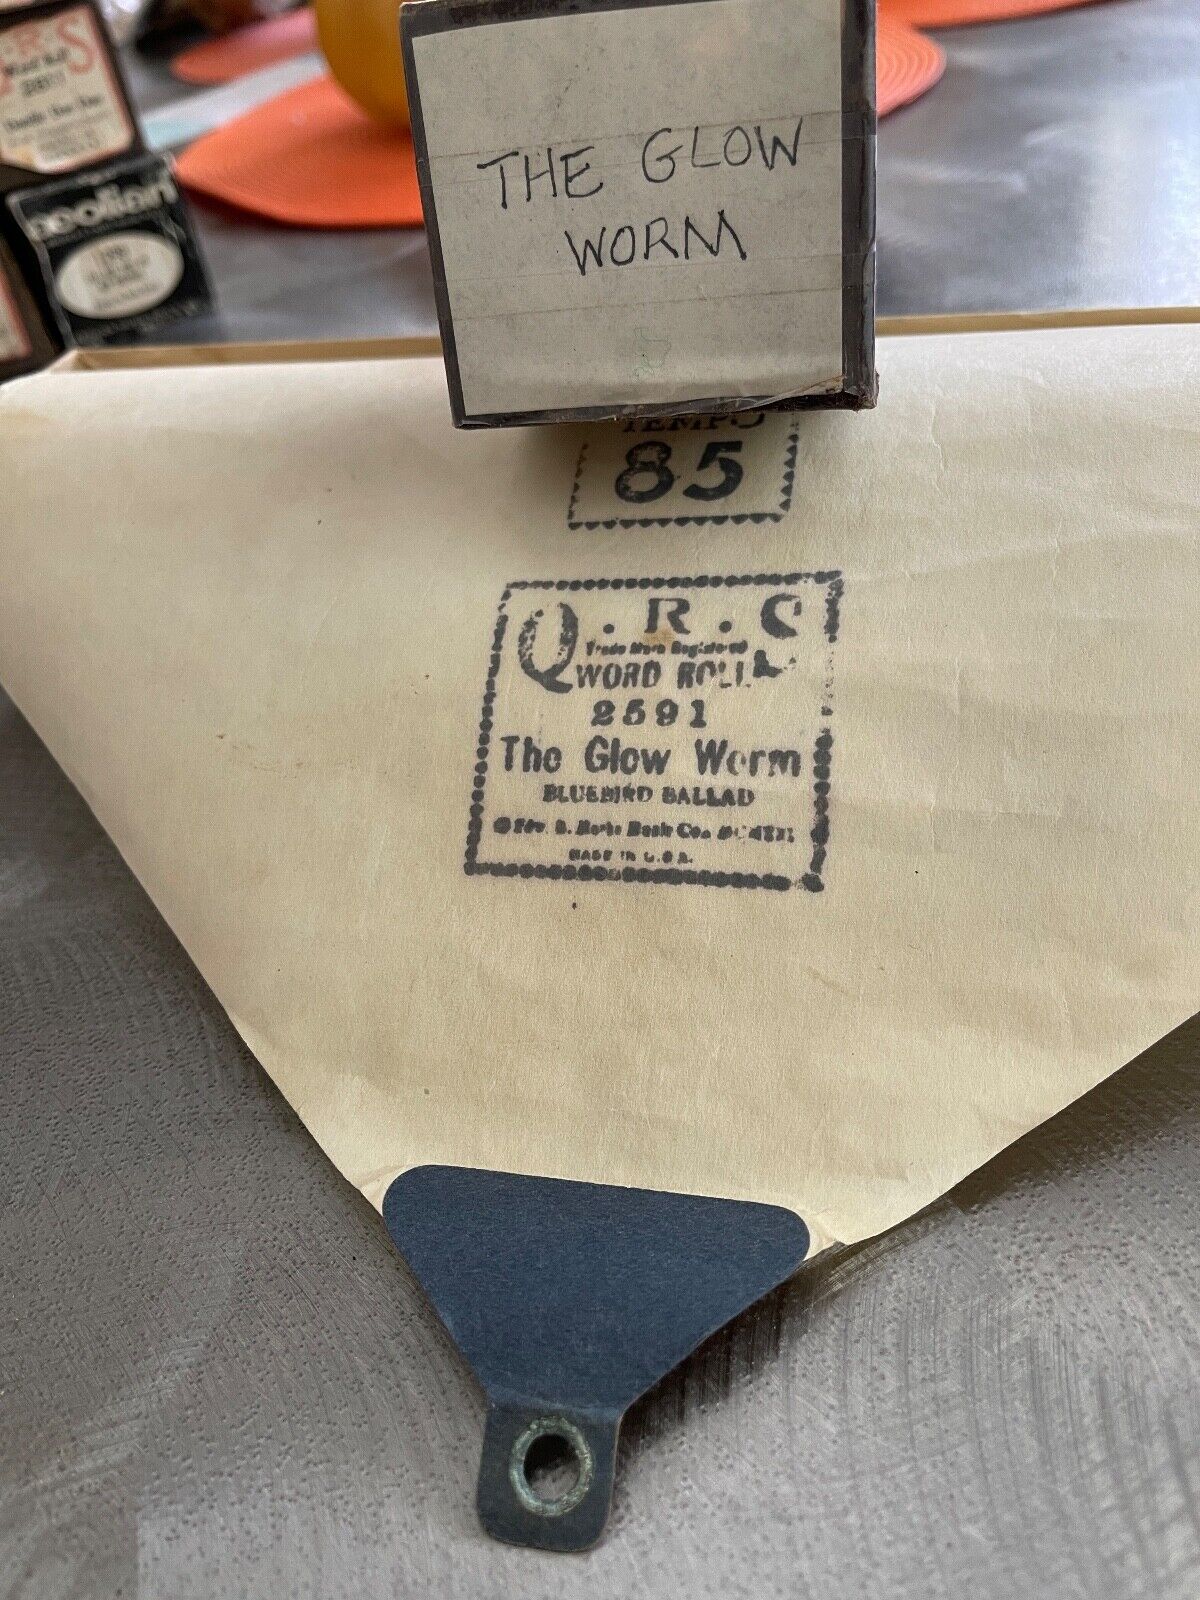 Qrs #2591 The Glow Worm Vintage Piano Roll (bluebird Ballad)